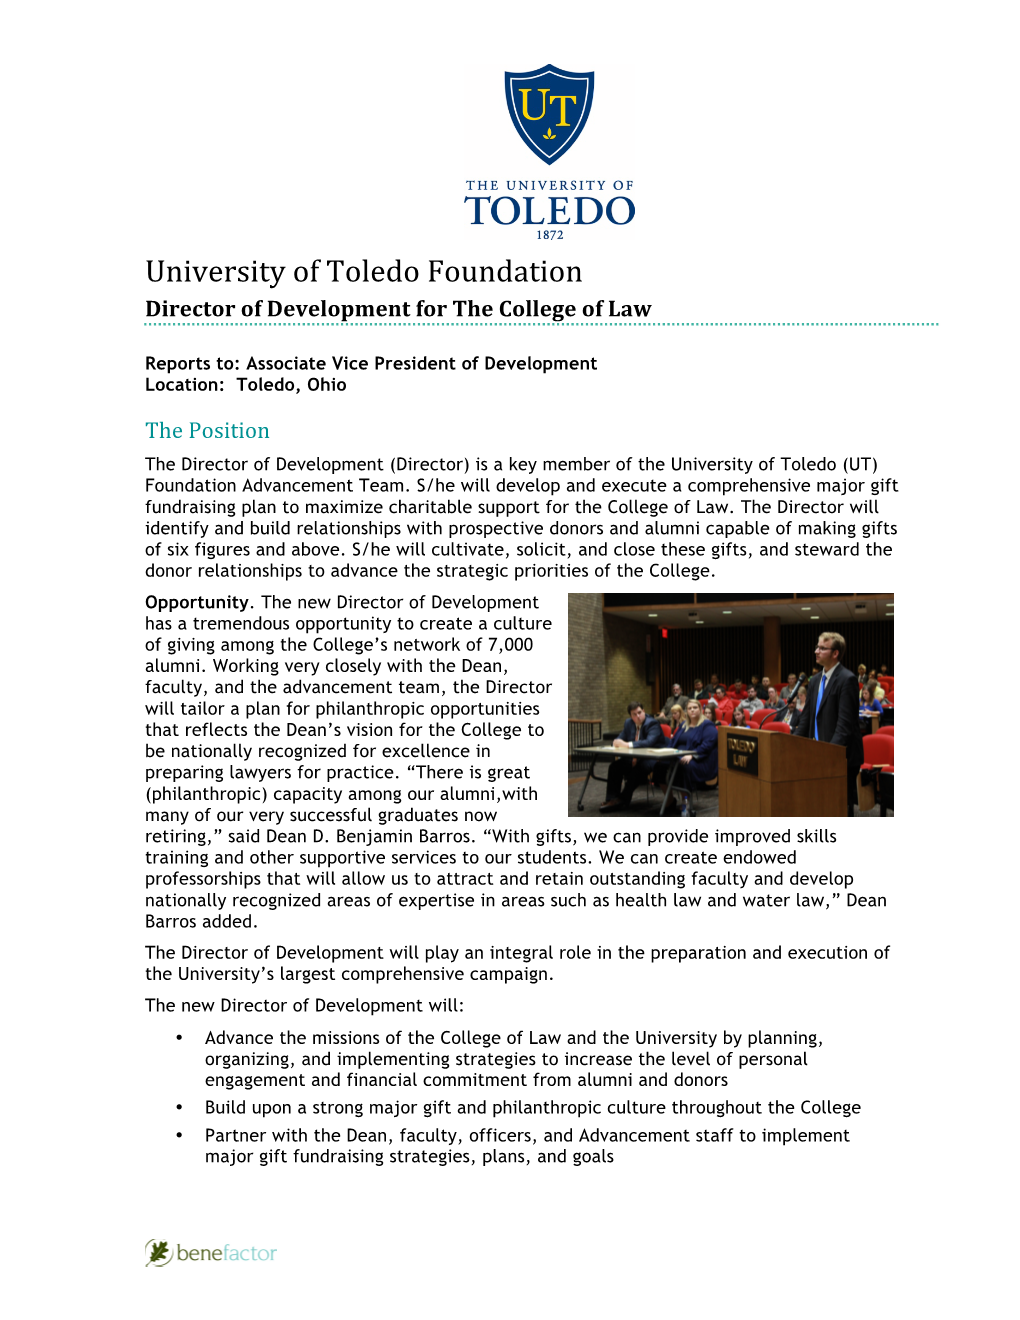 University of Toledo Foundation Director of Development for the College of Law